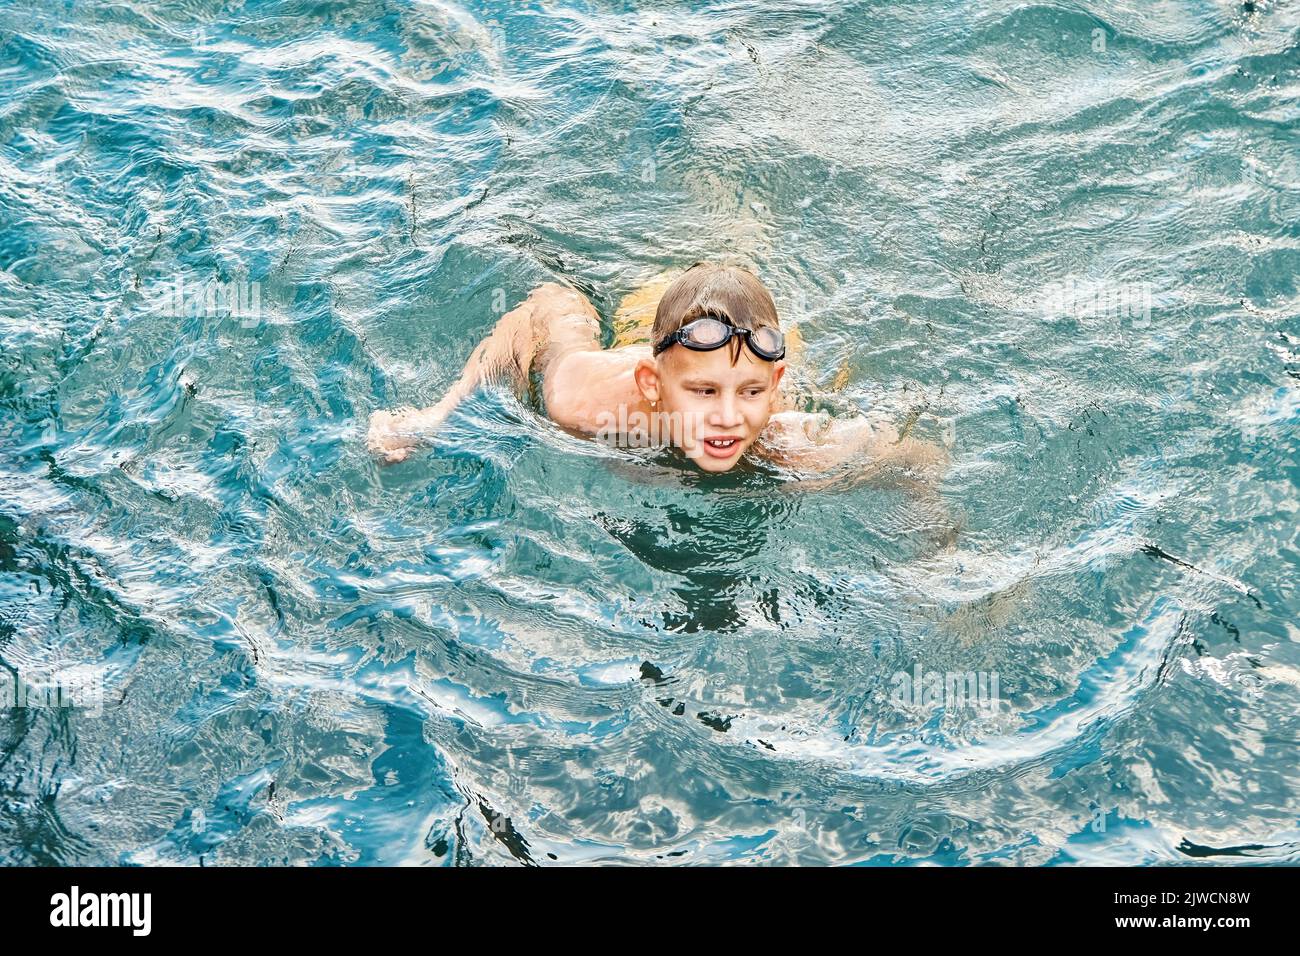 Junior schoolboy in swimming goggles enjoys holidays. Schoolkid swims in clear blue sea with smiling and excited expression on face closeup Stock Photo